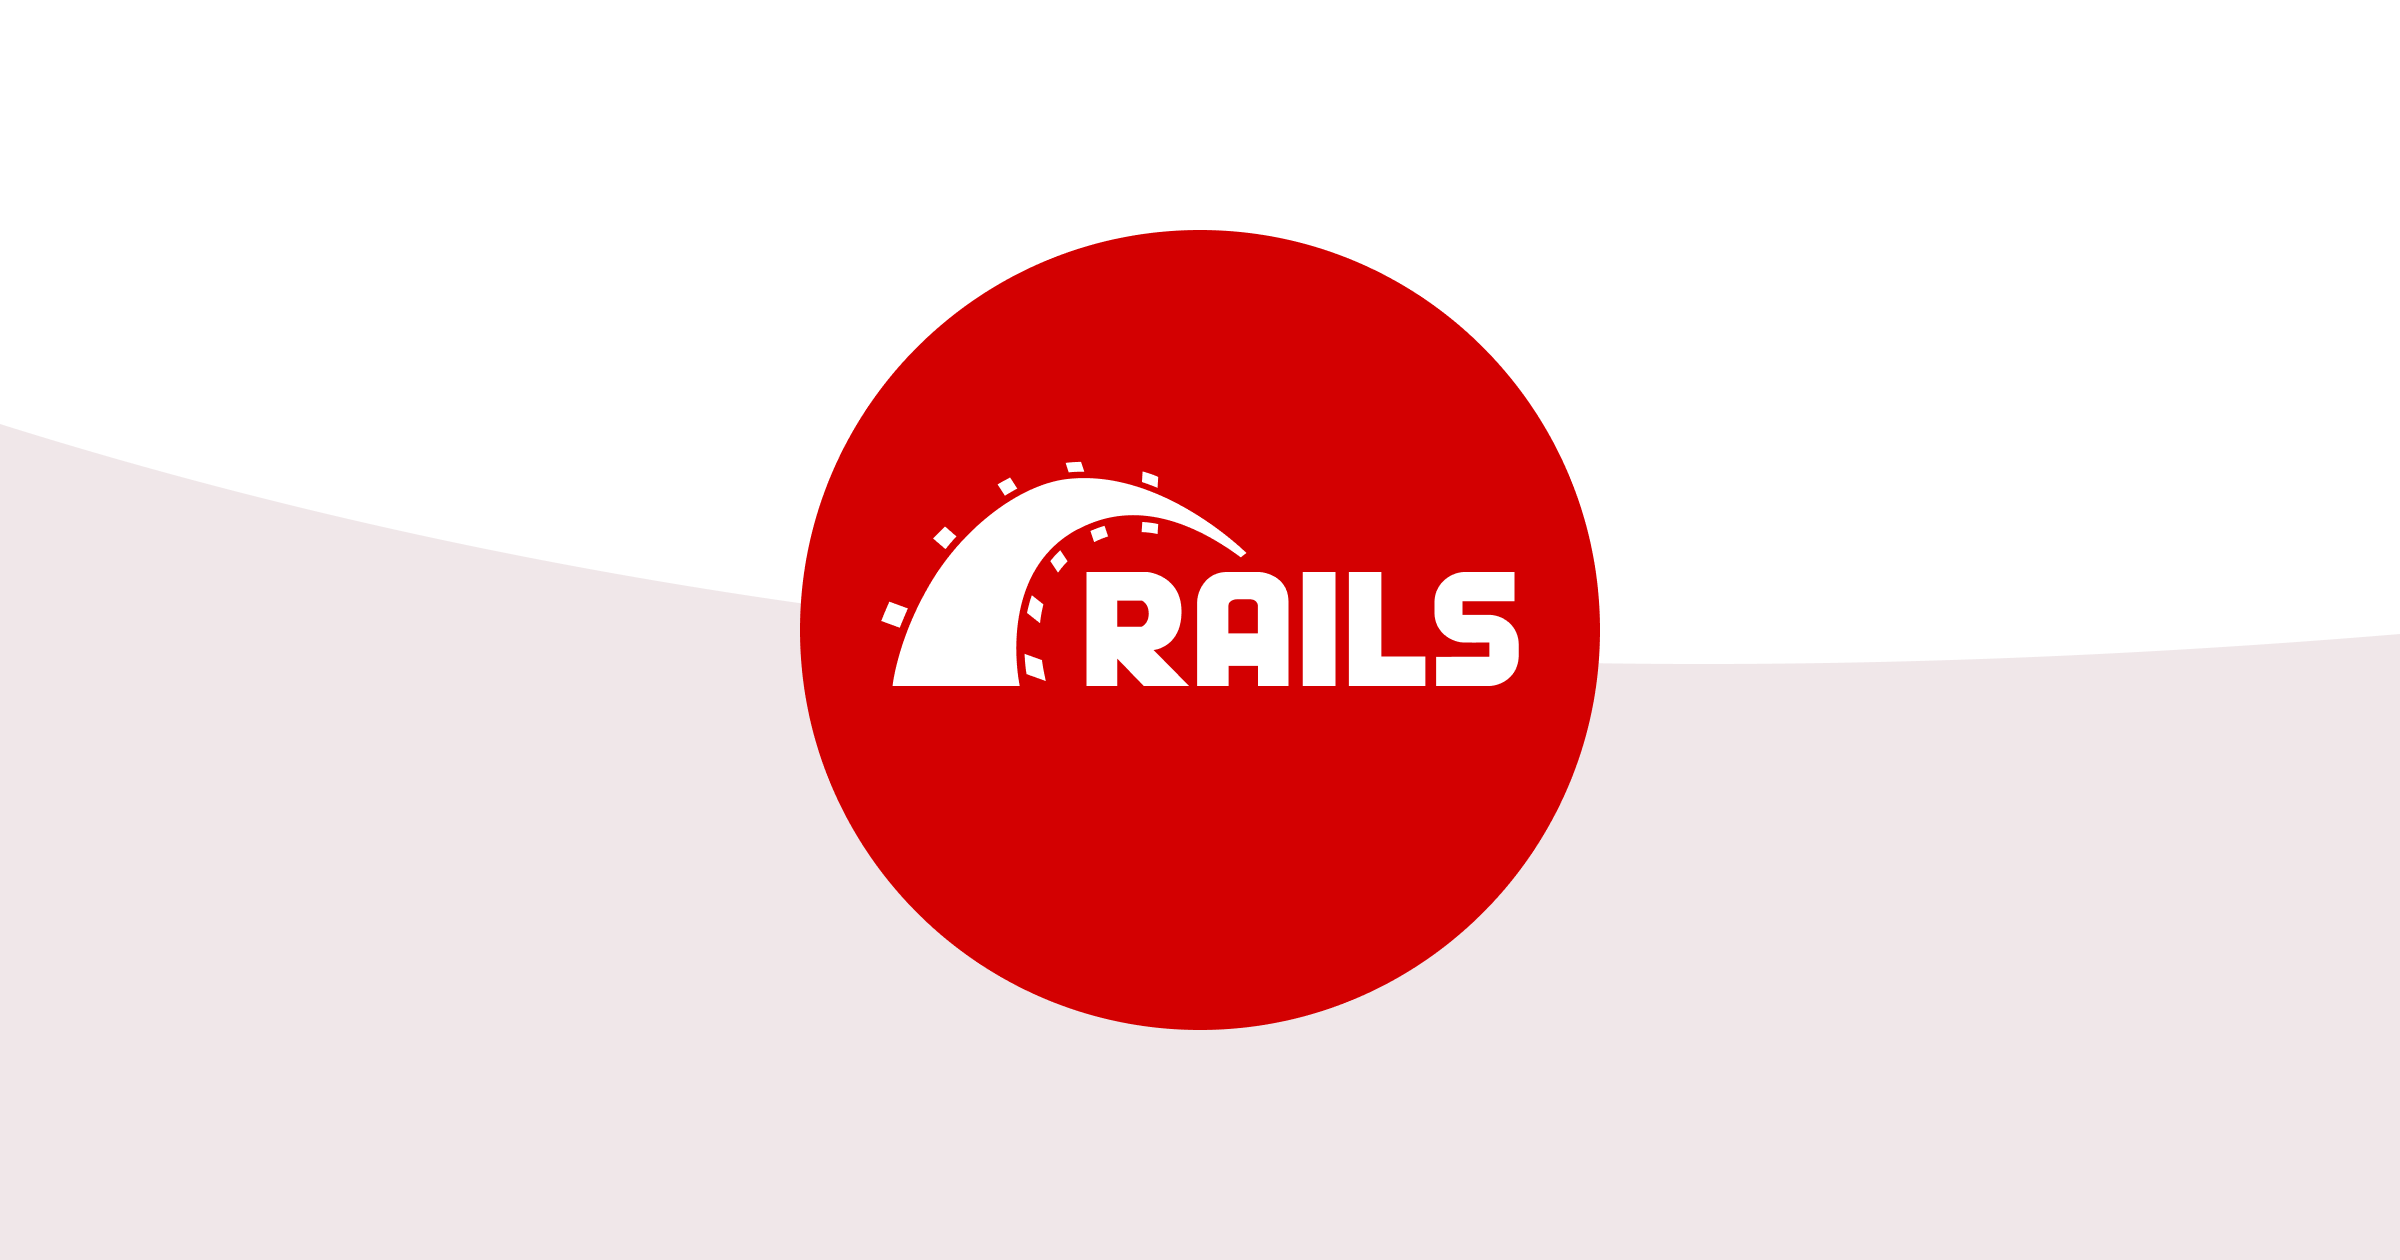 Introduction to Ruby on Rails